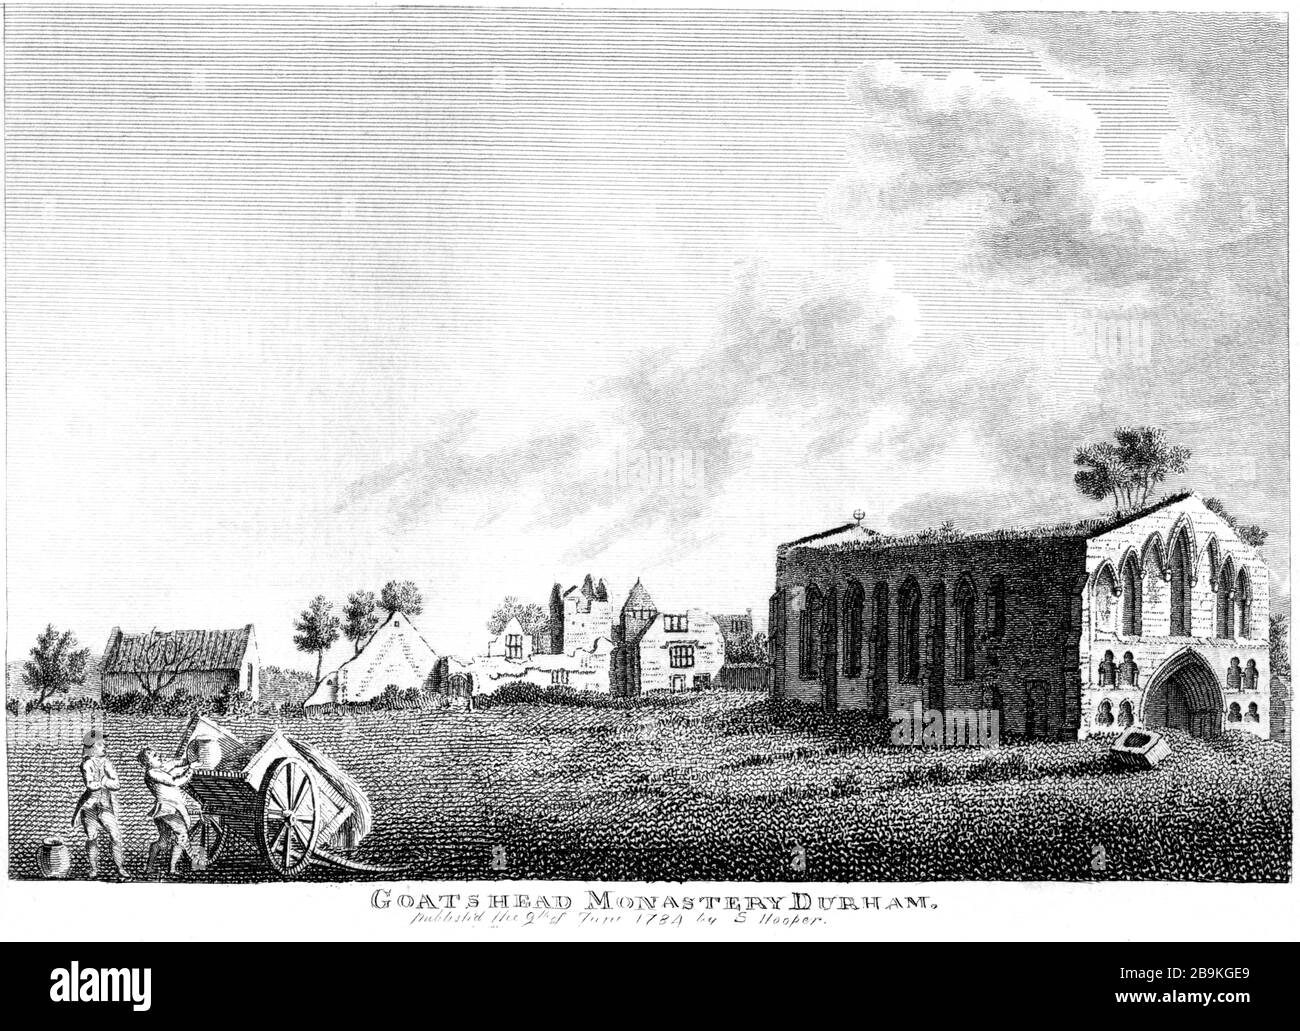 An engraving of Goatshead or Gateside Monastery 1784 (Gateshead) Durham scanned at high resolution from a book published around 1786. Stock Photo